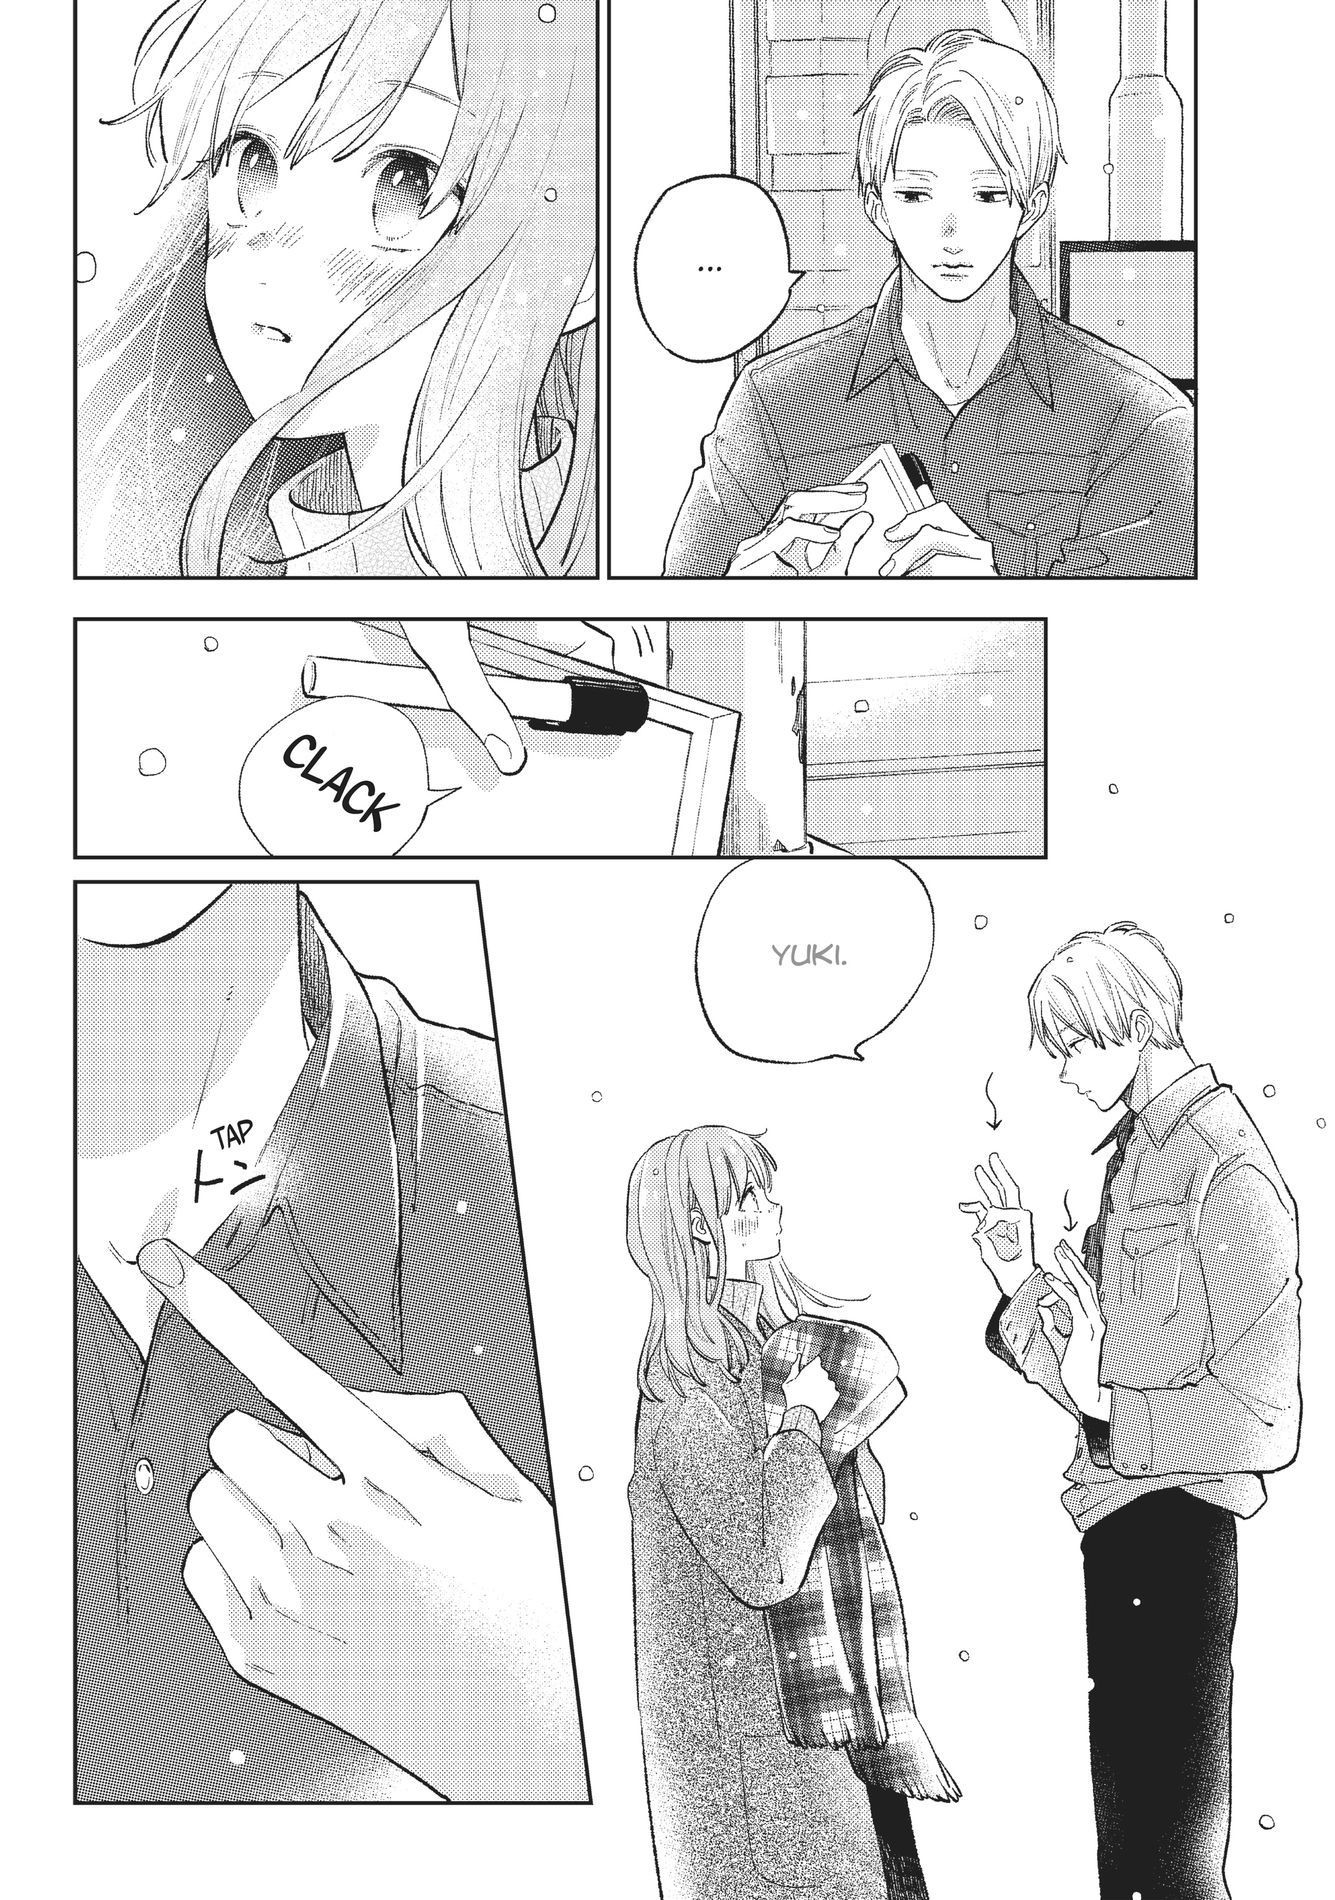 A Sign of Affection vol. 10 ch. 39 #asignofaffection #yubisakitorenr